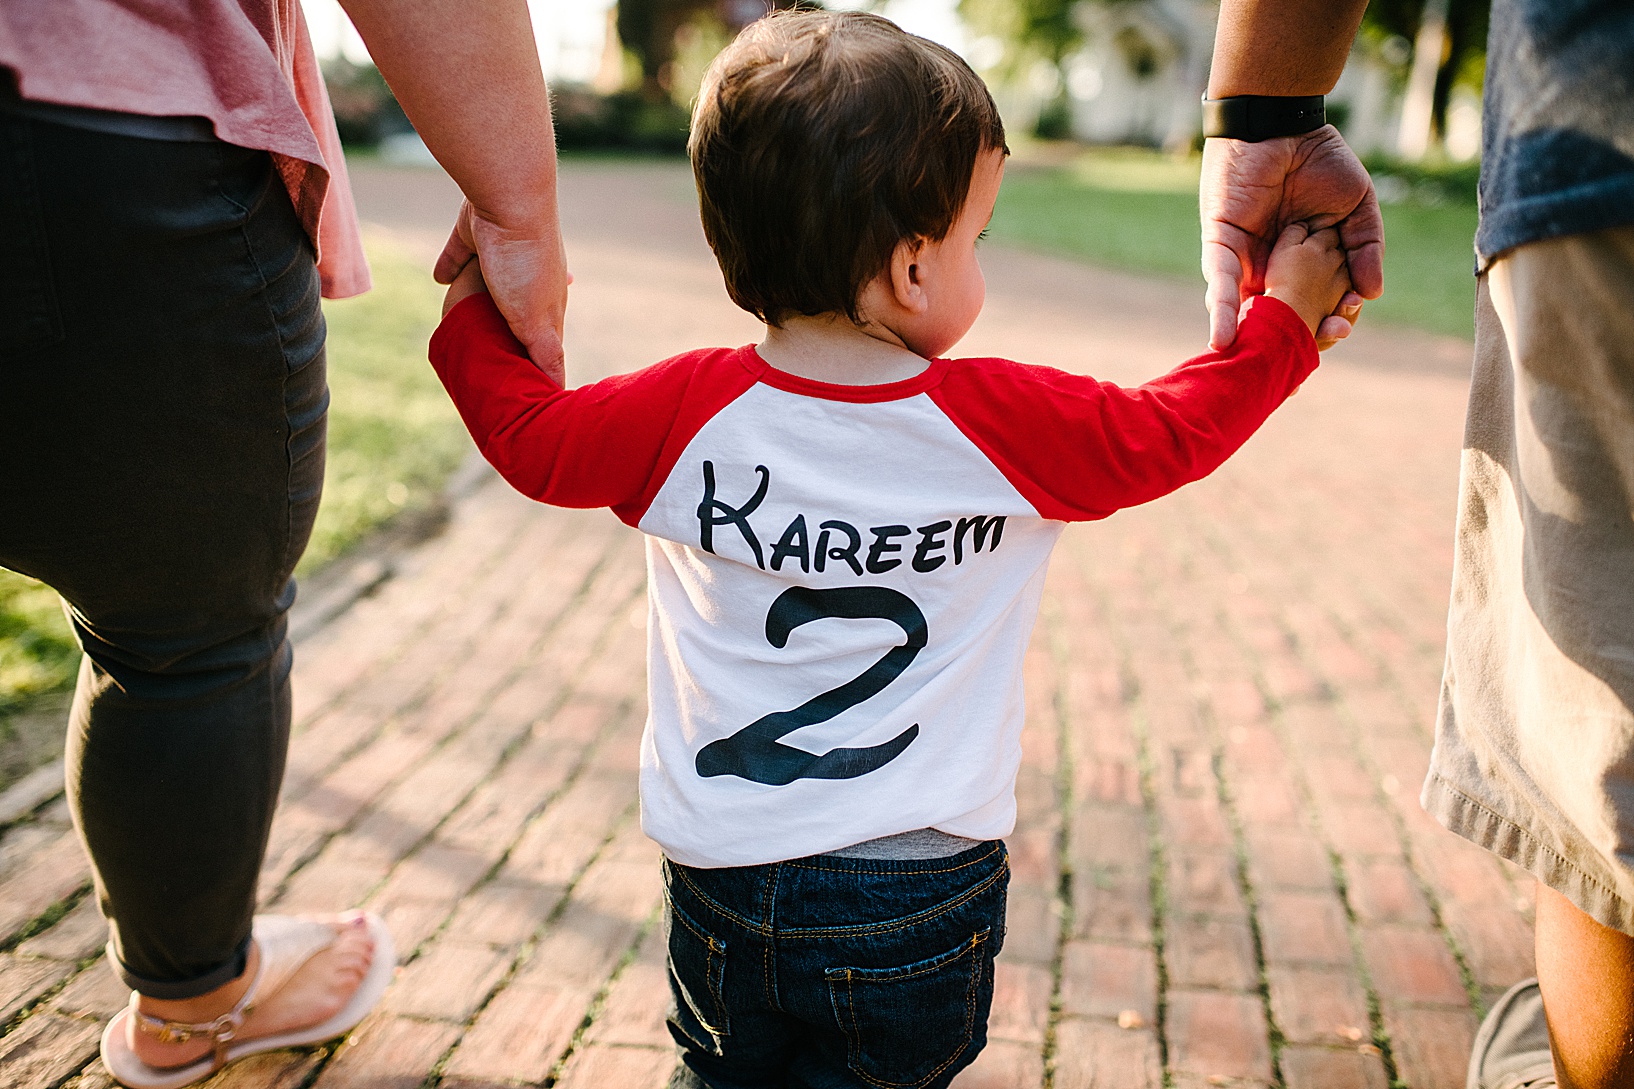 Back of little boy holding hands with his mom and dad, wearing a Disney font jersey that says "Kareem"